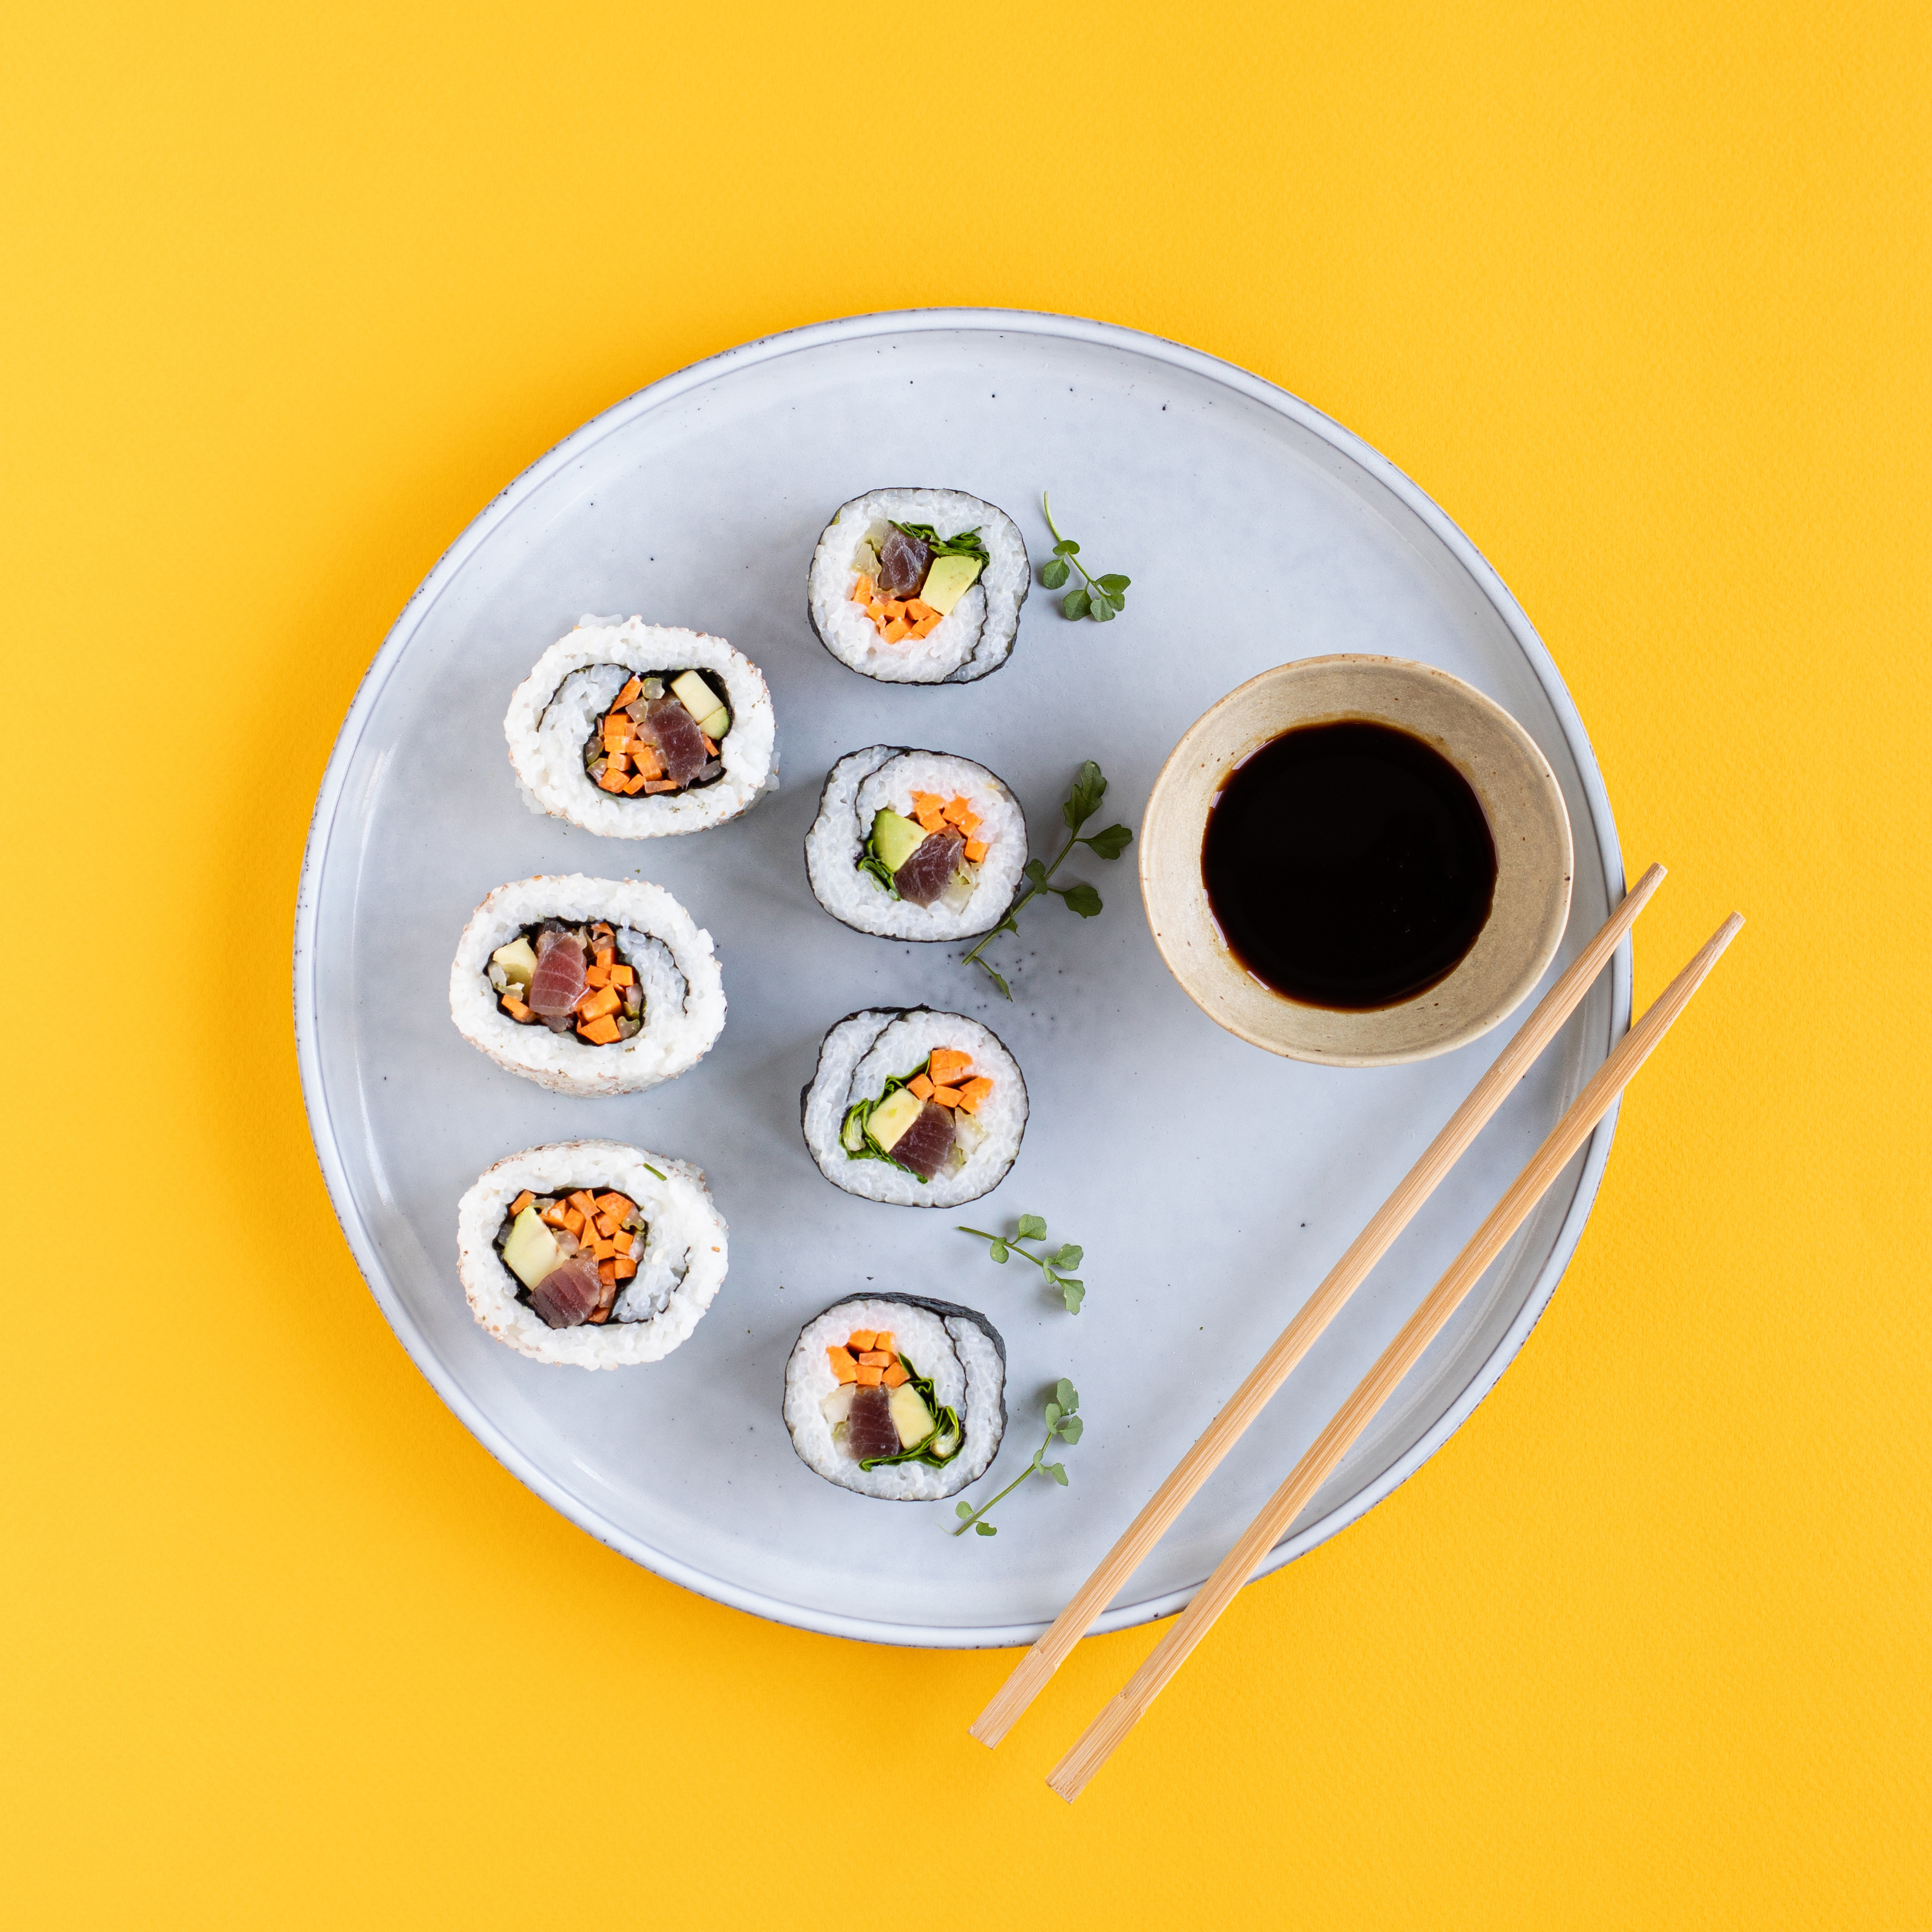 Rice sushi rolls with Balsamic Vinegar of Modena PGI, tuna and vegetables